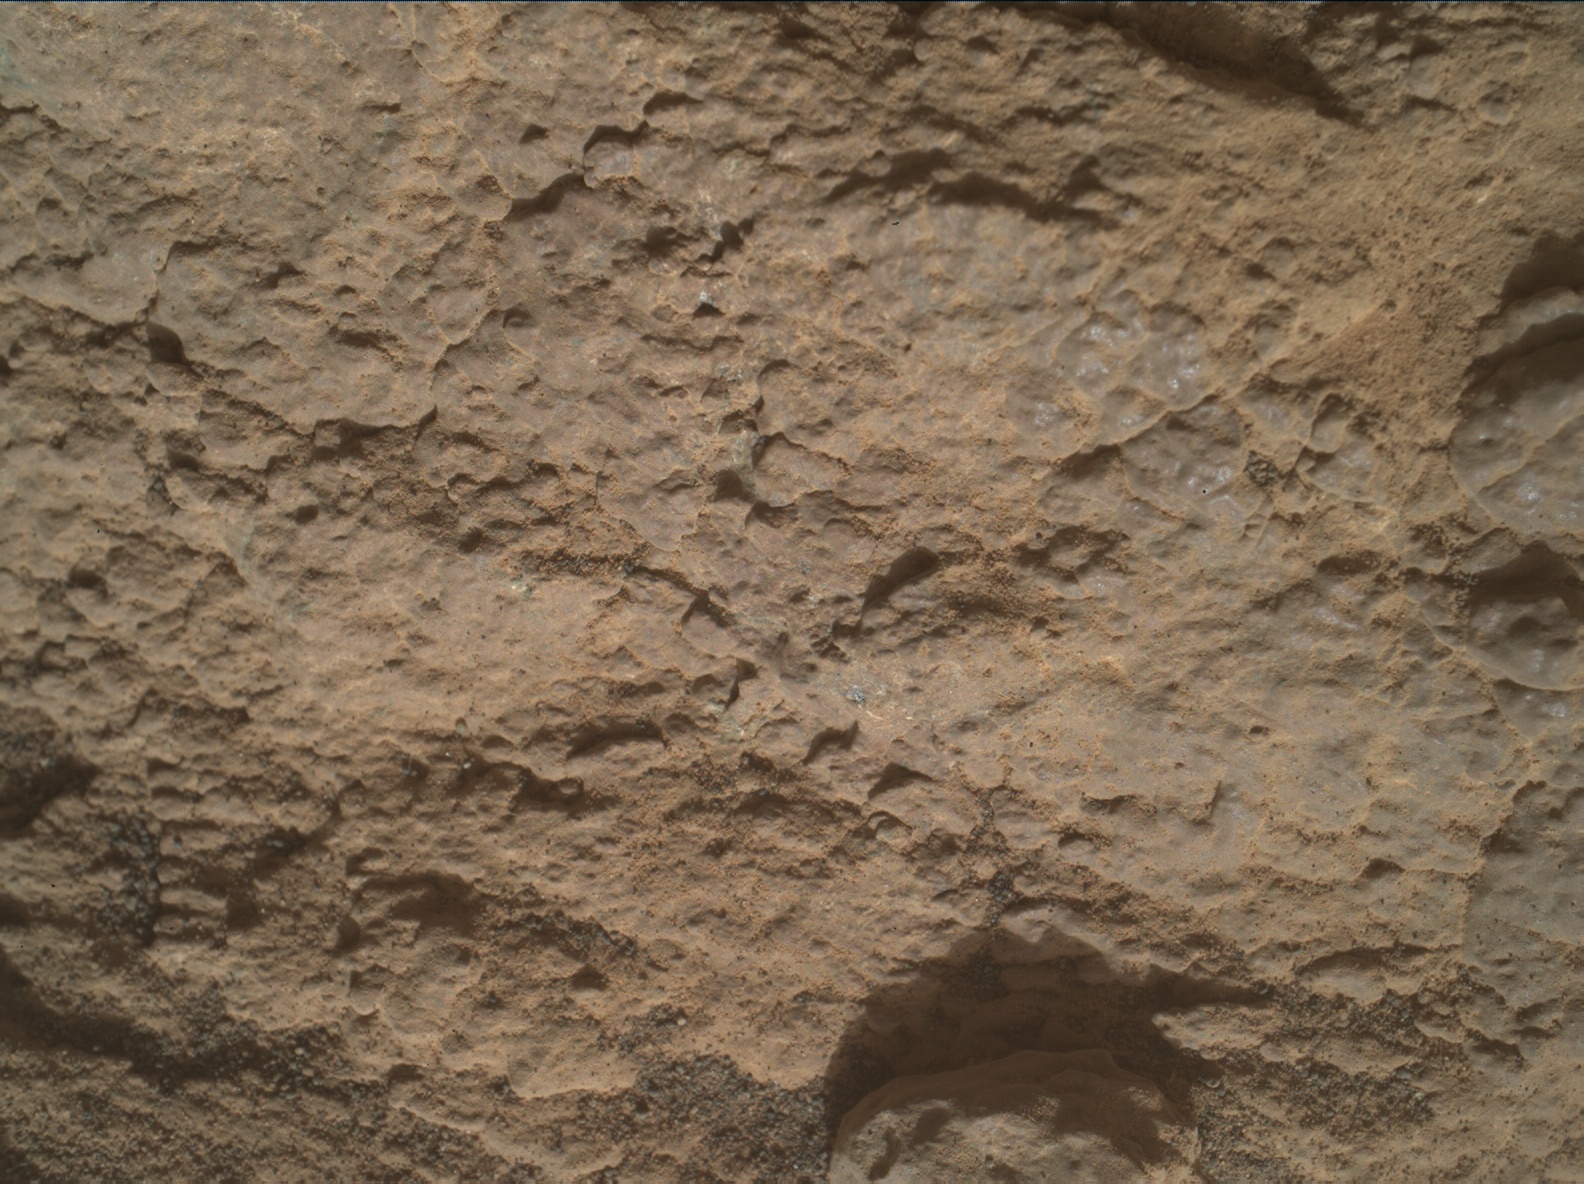 Nasa's Mars rover Curiosity acquired this image using its Mars Hand Lens Imager (MAHLI) on Sol 2591